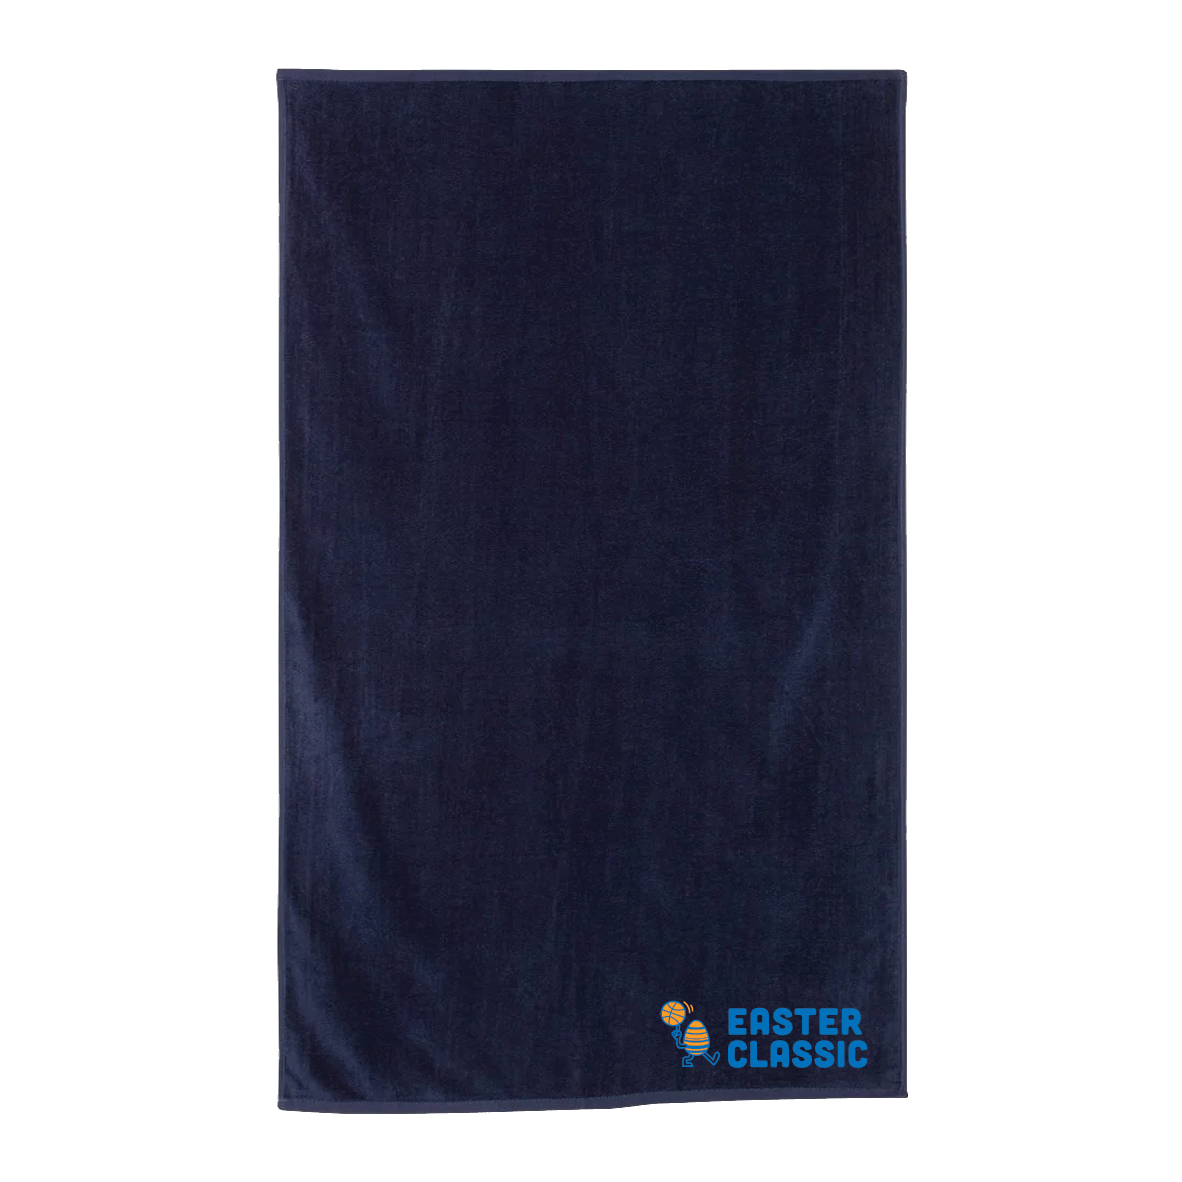 EASTER CLASSIC EVENT TOWEL LARGE